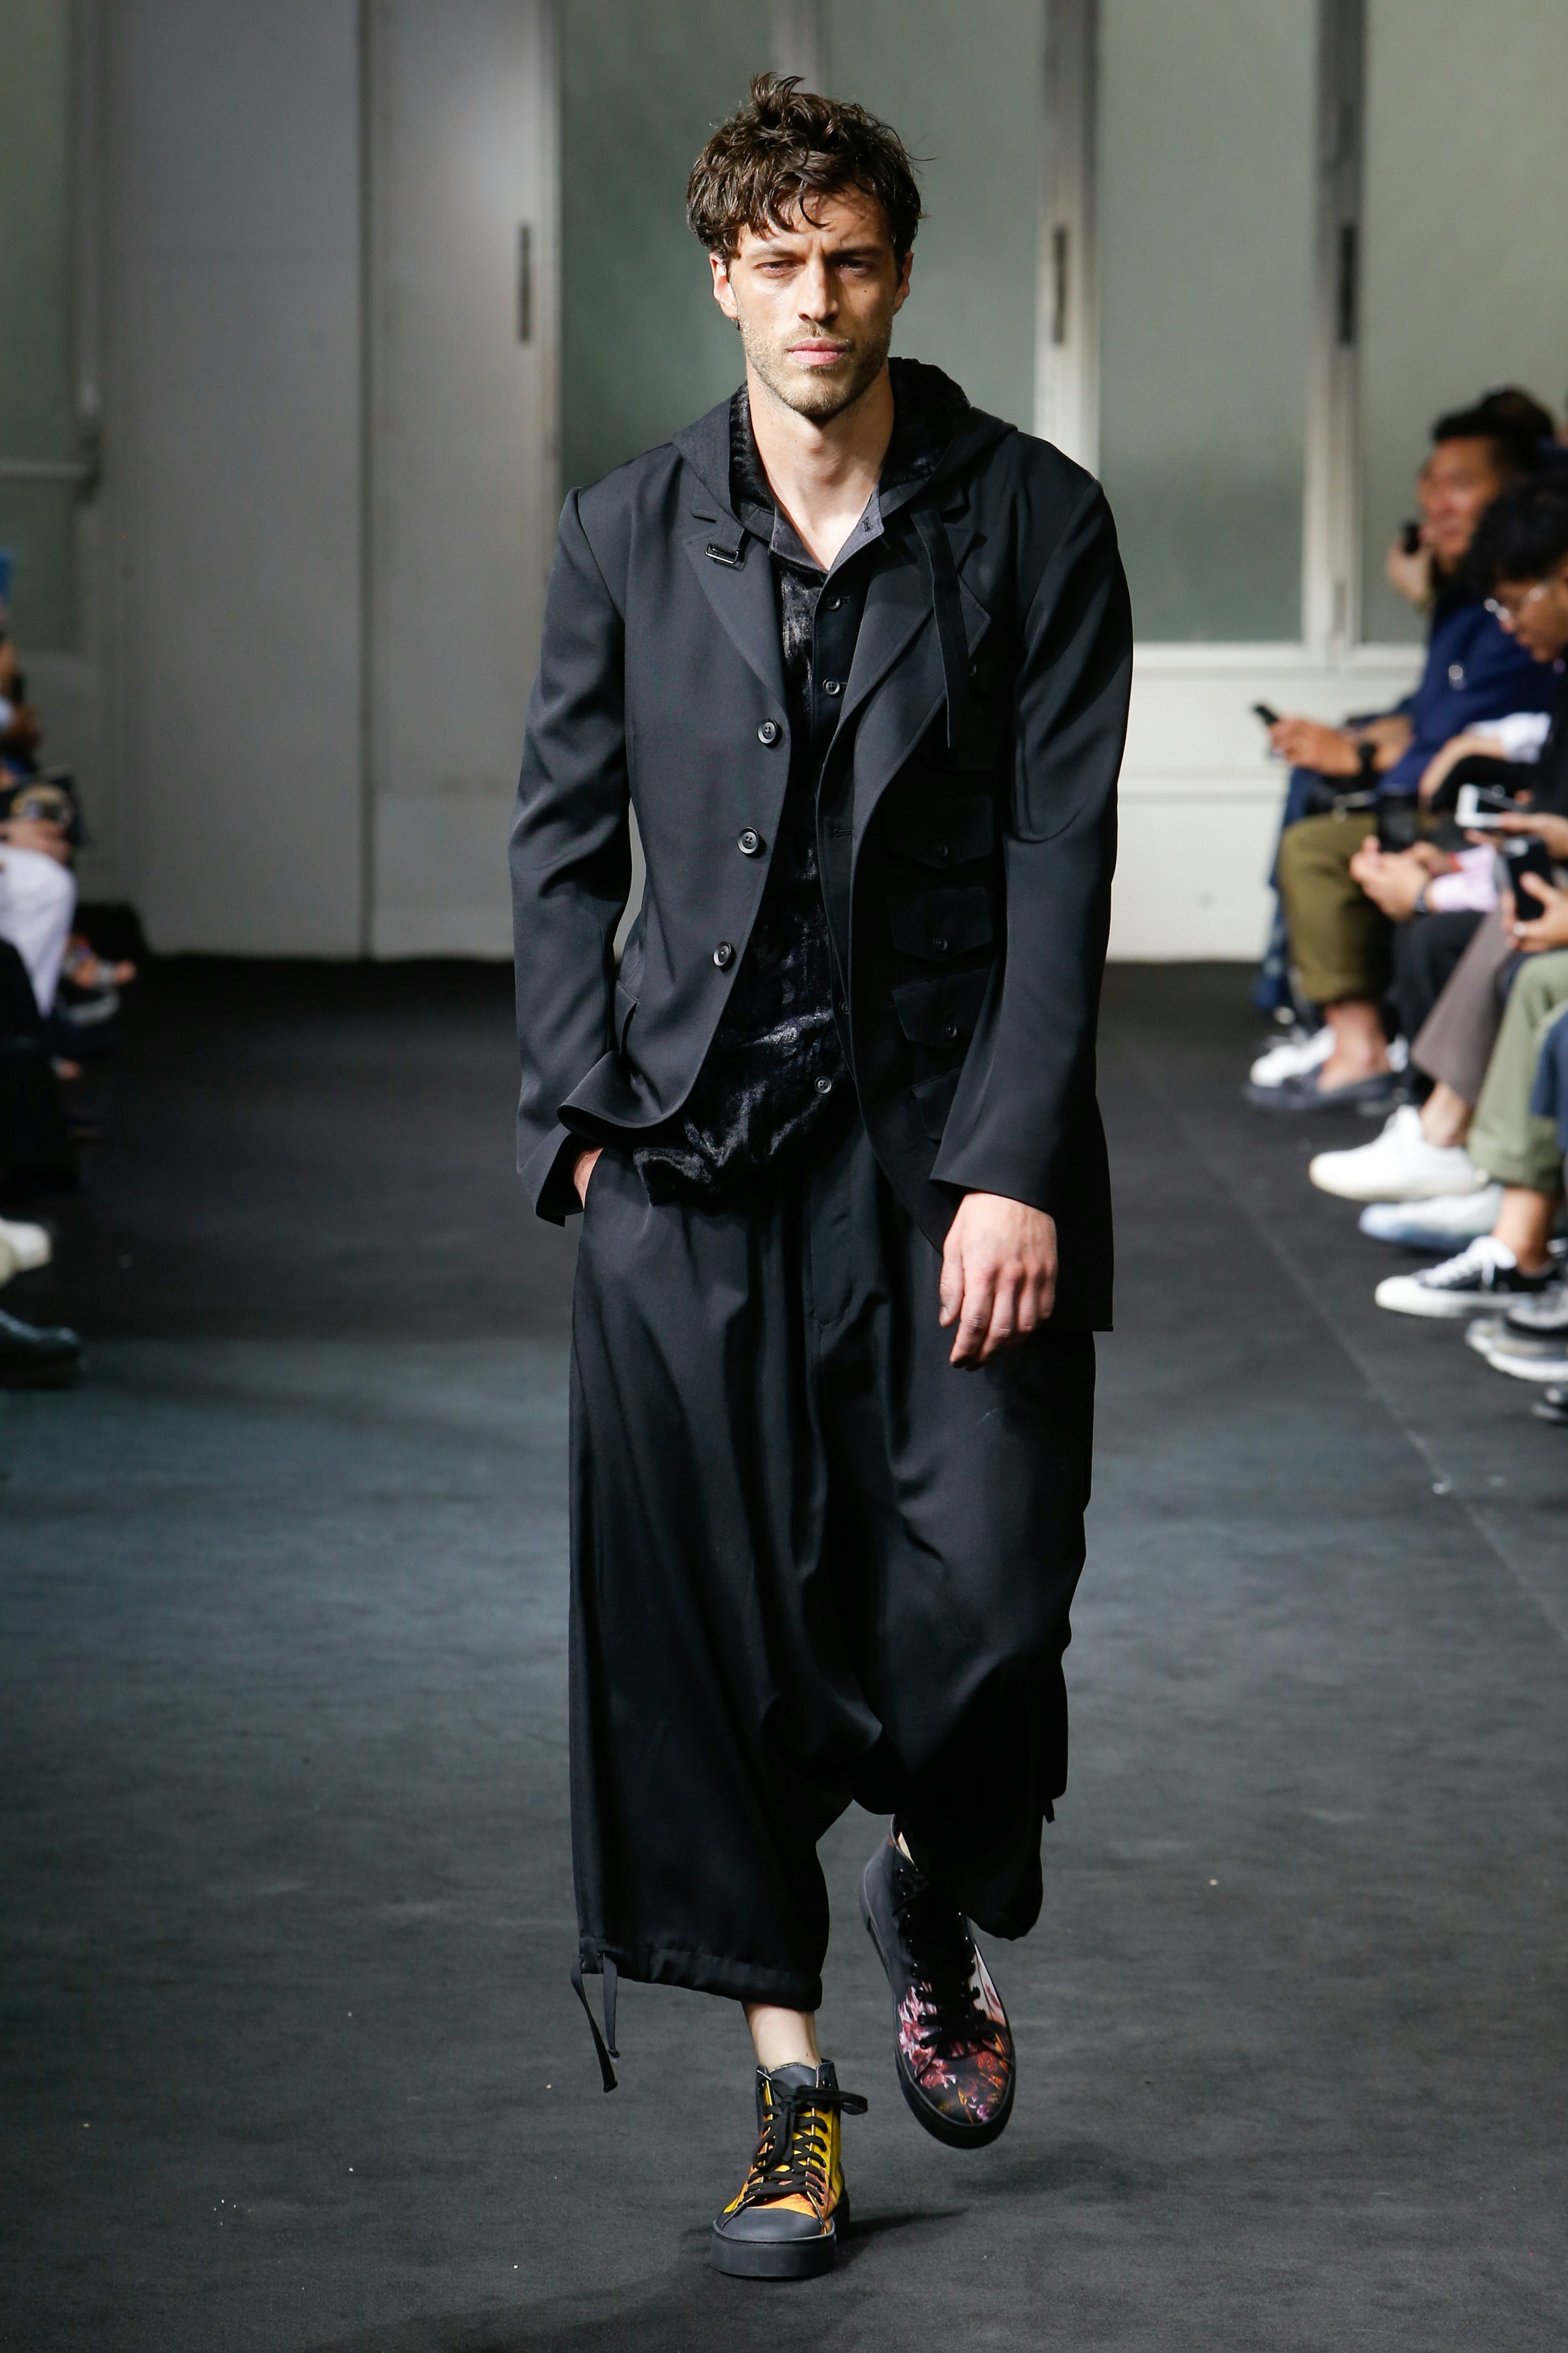 “Edgy” Menswear and Wearing Black | a little bit of rest